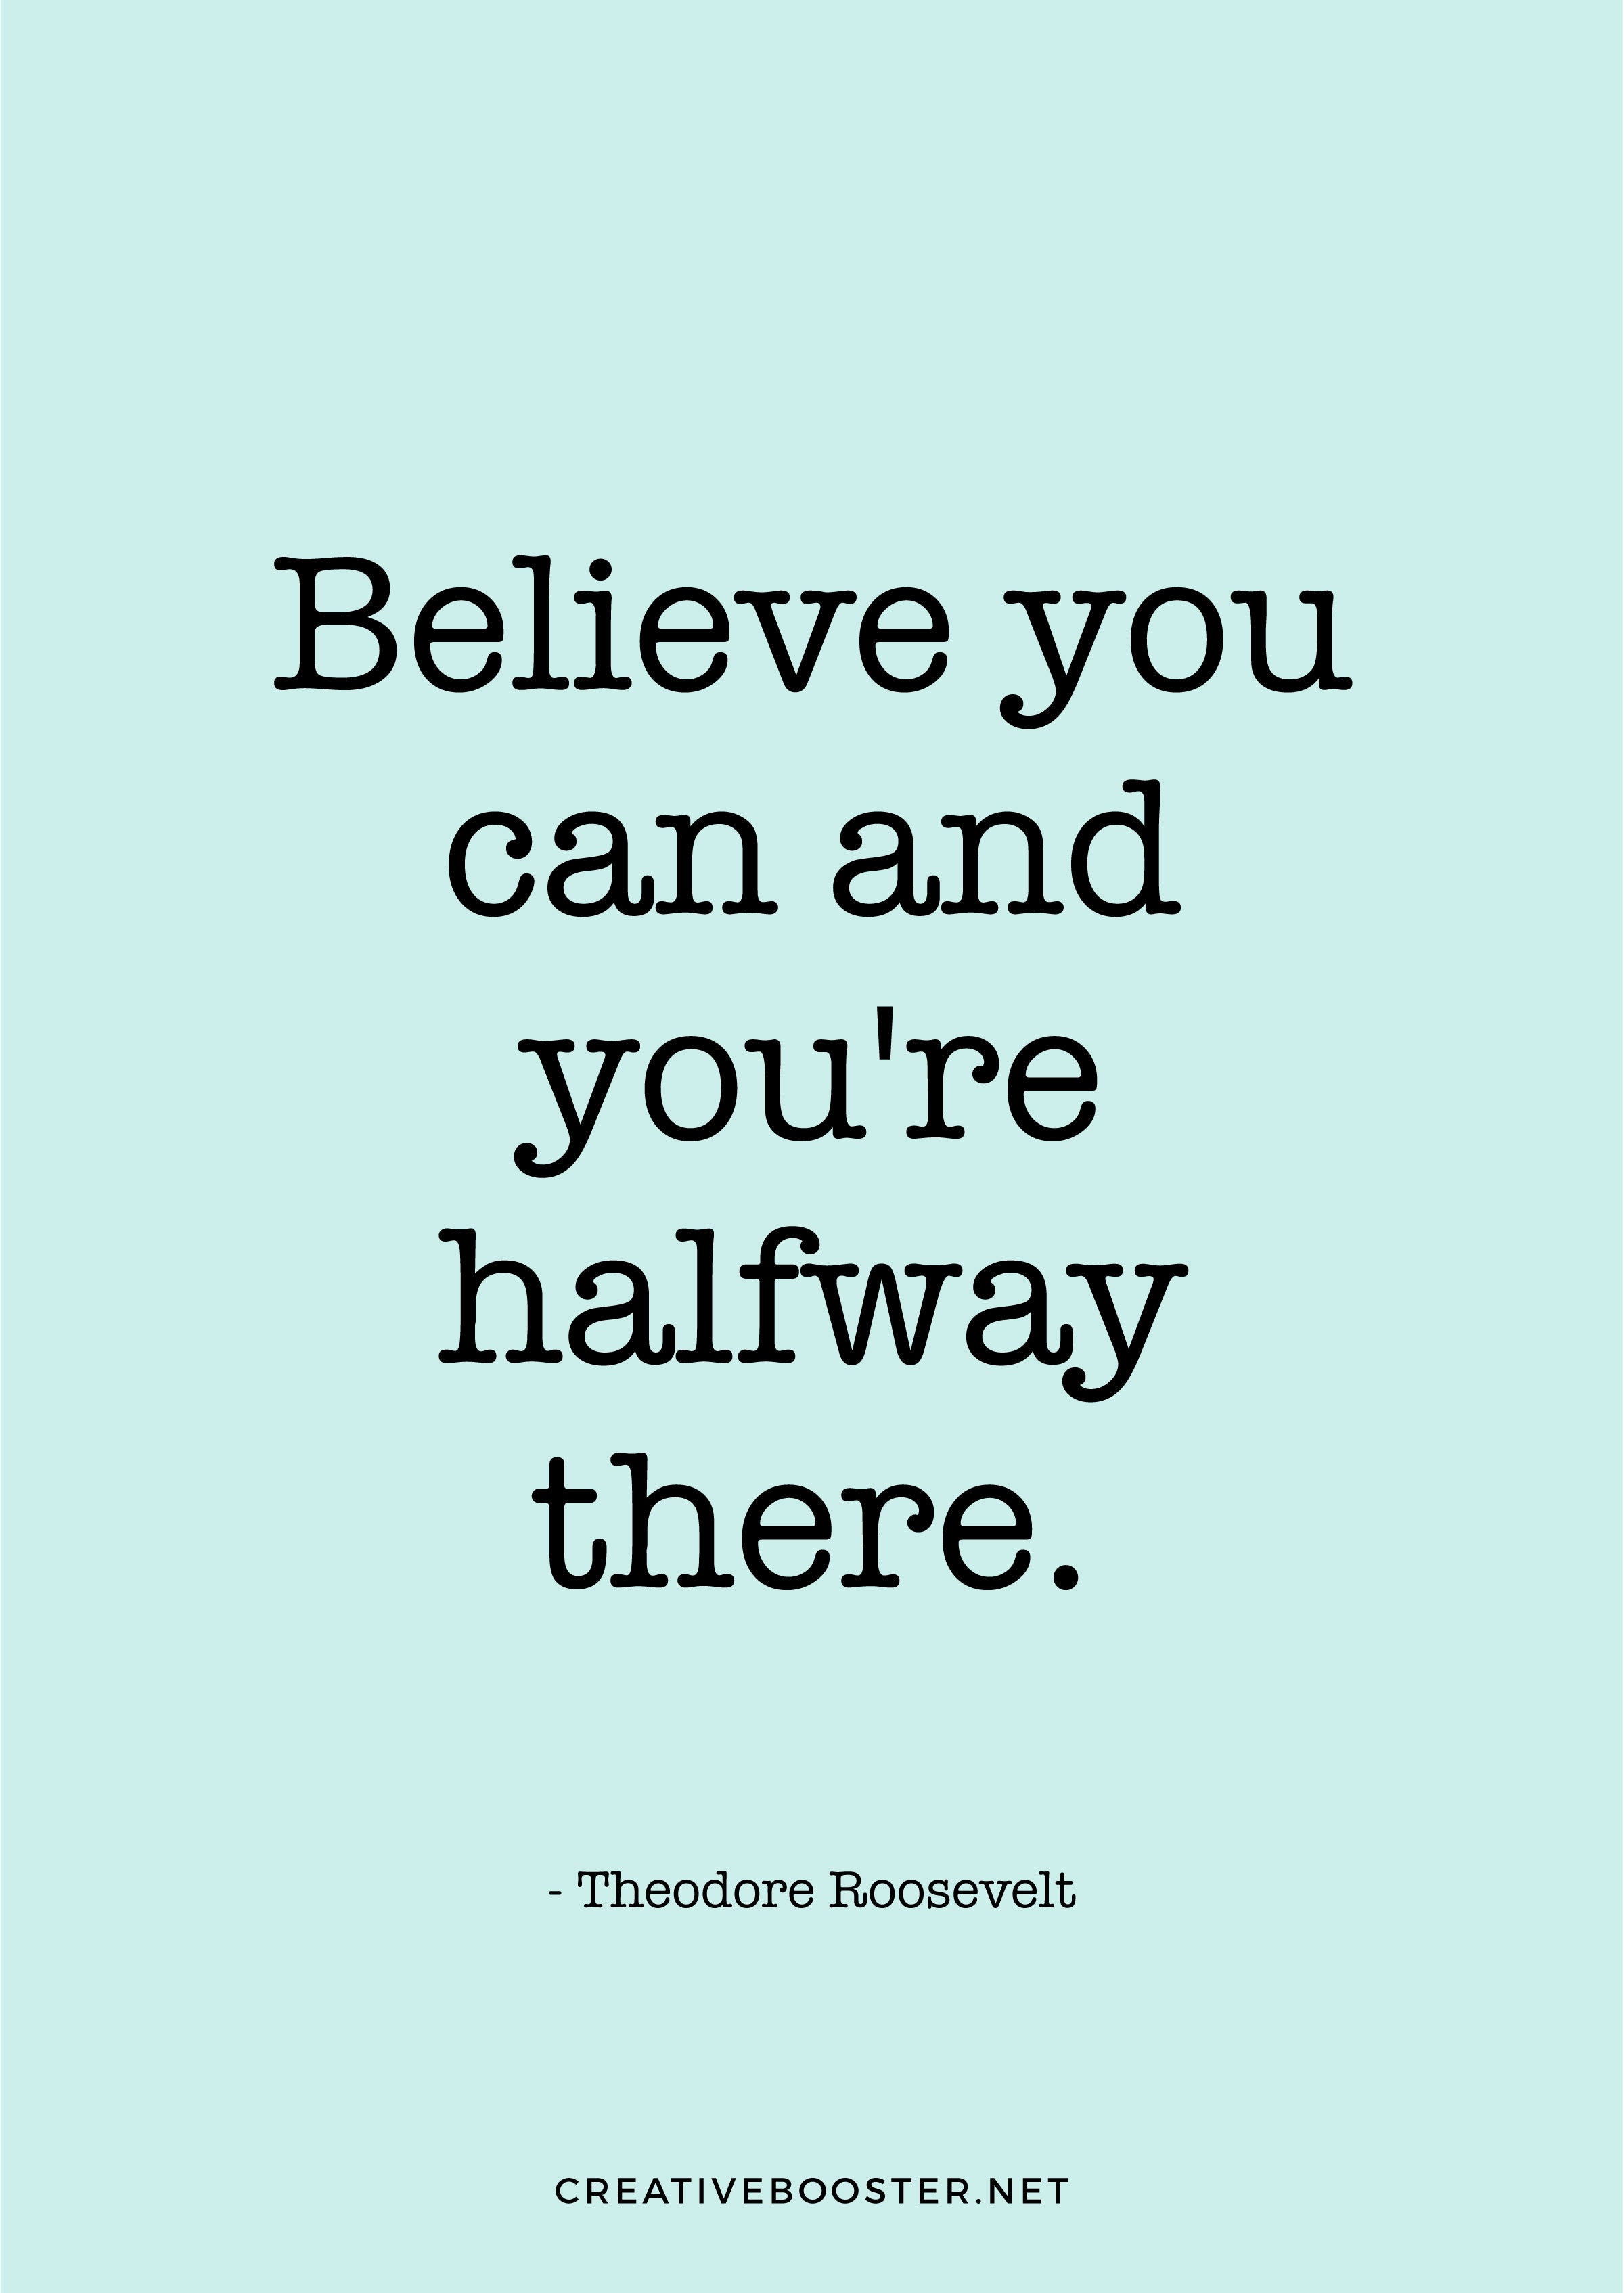 Popular-You-Got-This-Quotes-"Believe you can and you're halfway there." - Theodore Roosevelt (Quote Art Print)